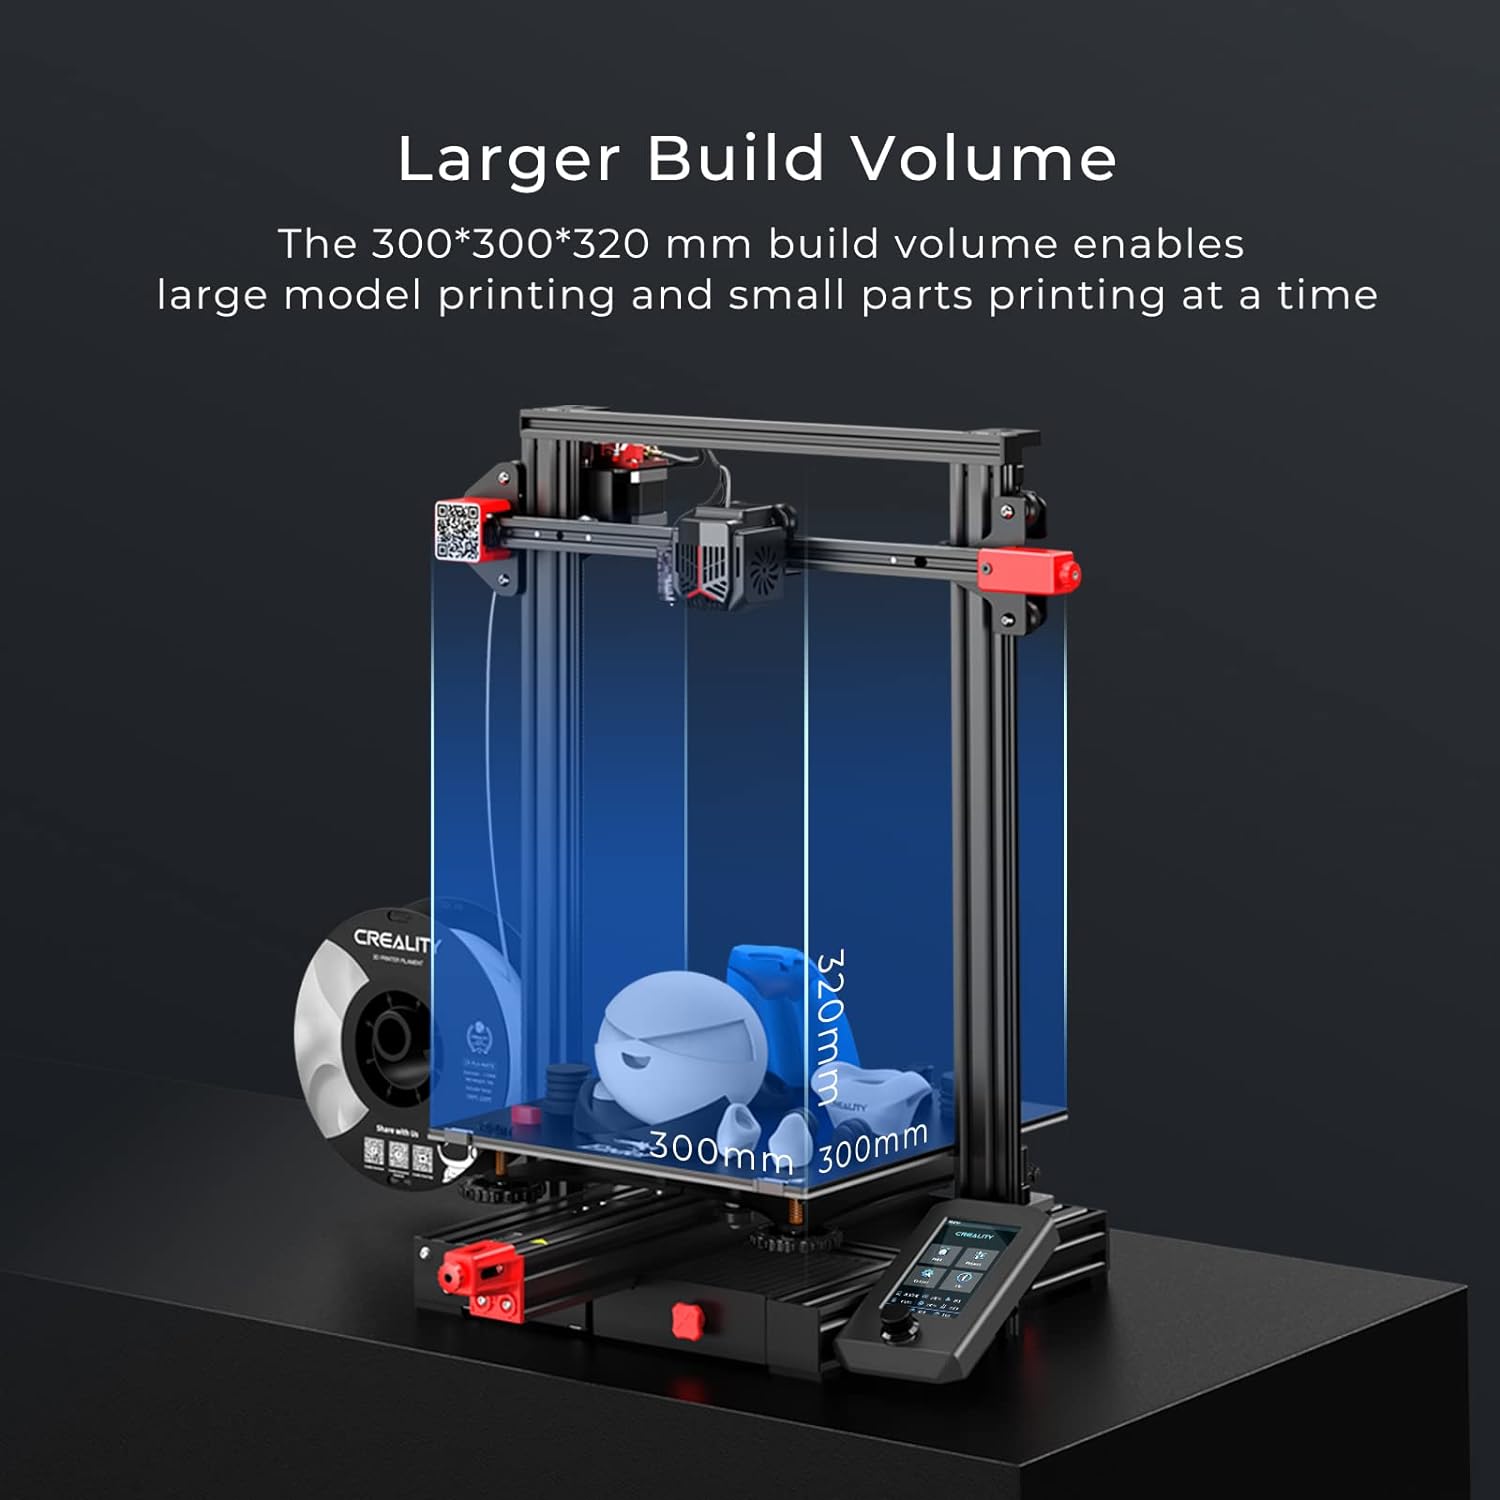 creality-ender-3-max-neo-3d-printer-cr-touch-auto-leveling-dual-z-axis-full-metal-extruder-silent-mainboard-filament-sen-3 Creality Ender 3 Max Neo 3D Printer Review